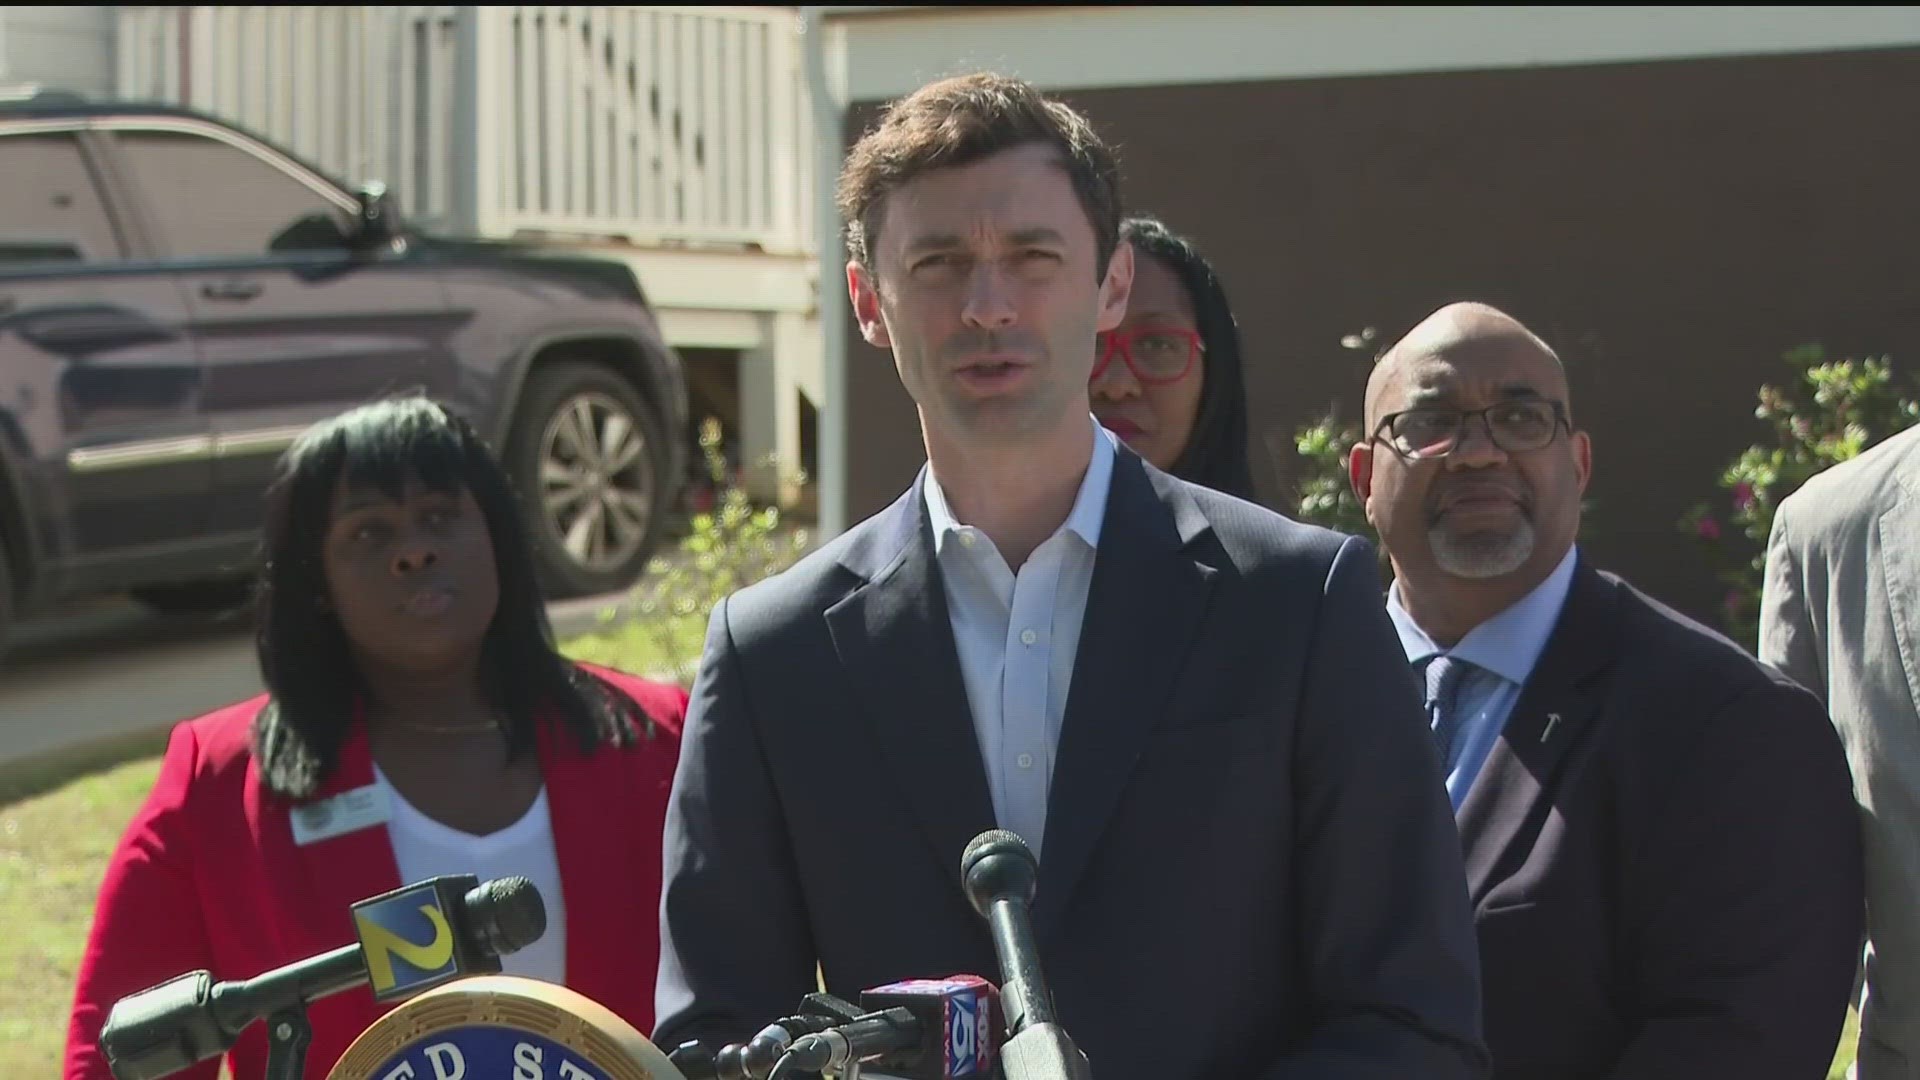 Georgia Sen. Jon Ossoff is promising that we'll hear very soon from the head of the postal service as thousands across Georgia continue to suffer from mail delays.